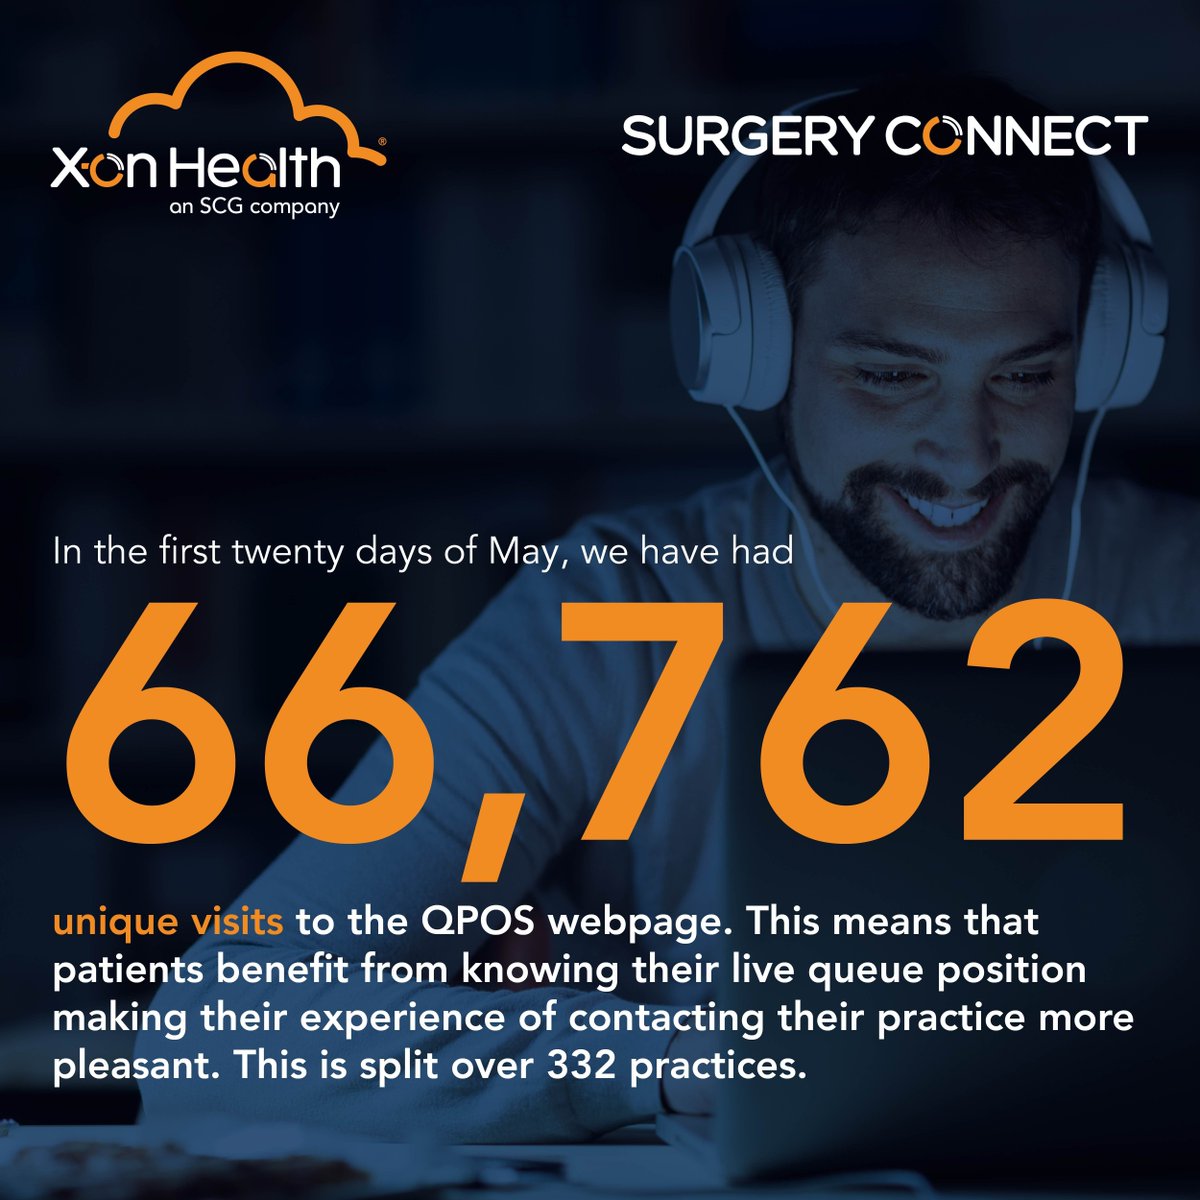 With #SurgeryConnect, the Patient Callback feature can be configured for patients to receive an SMS detailing their Queue Position via webpage link. In the first 20 days of May, we had 66,762 unique visits to the webpage. For more: buff.ly/4bRCuO0 #PatientExperience